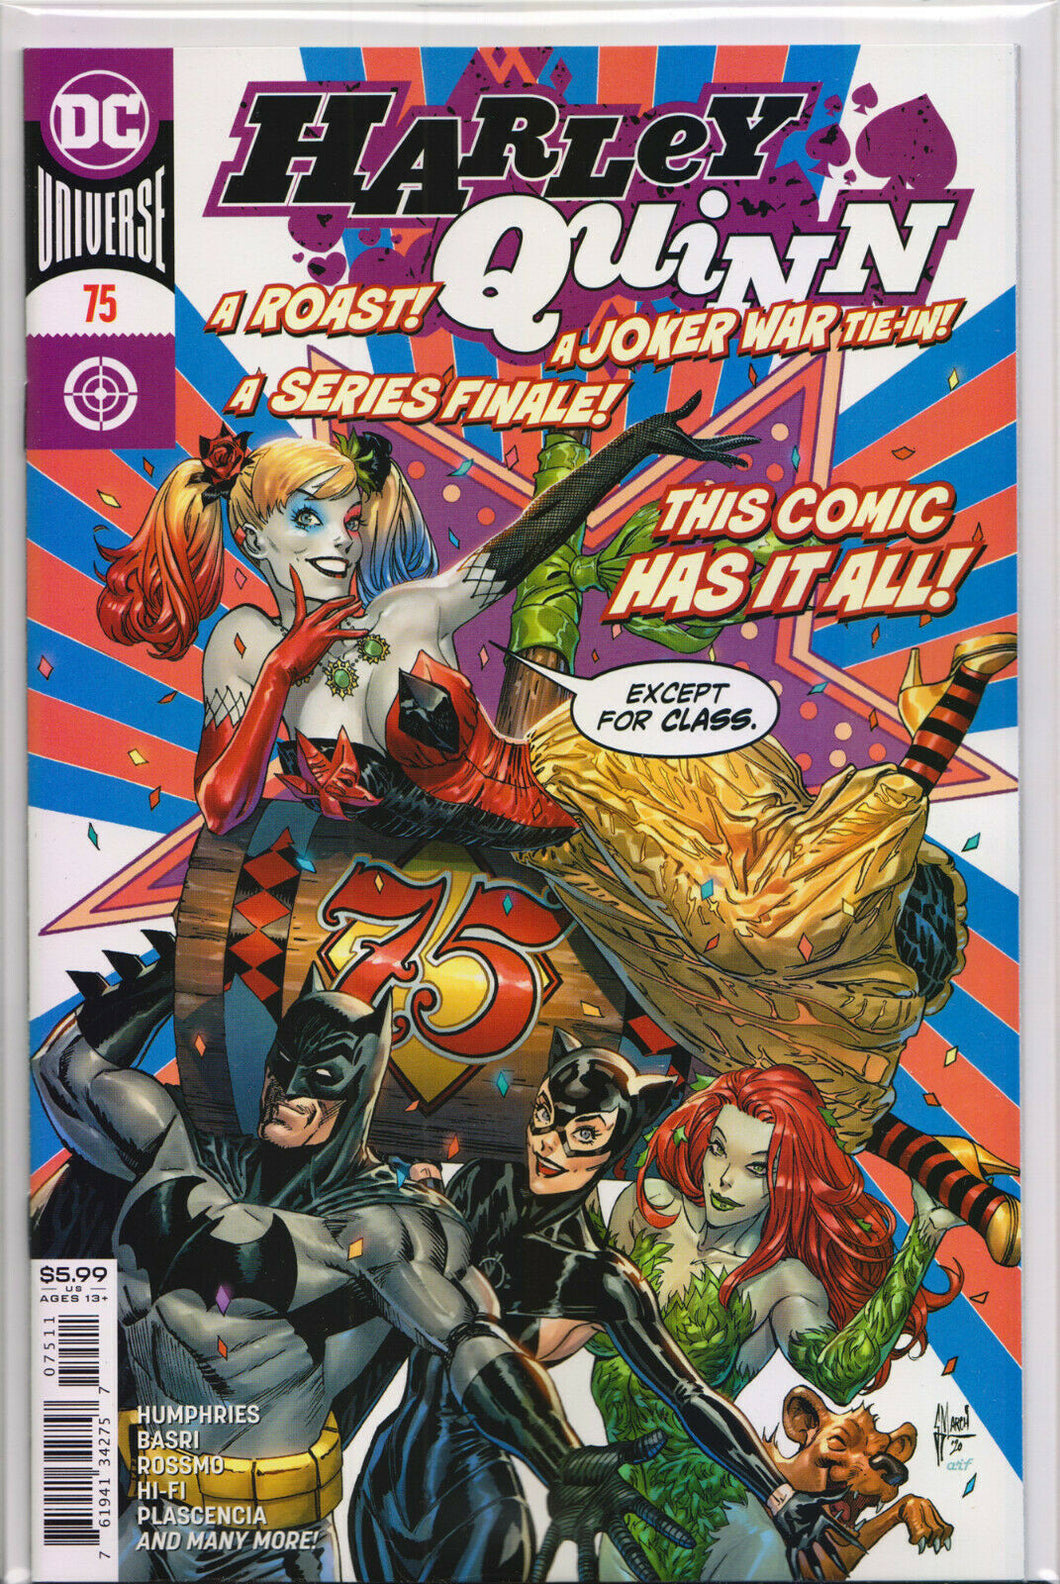 HARLEY QUINN #75 (GUILLEM MARCH VARIANT)(FINAL ISSUE) COMIC BOOK